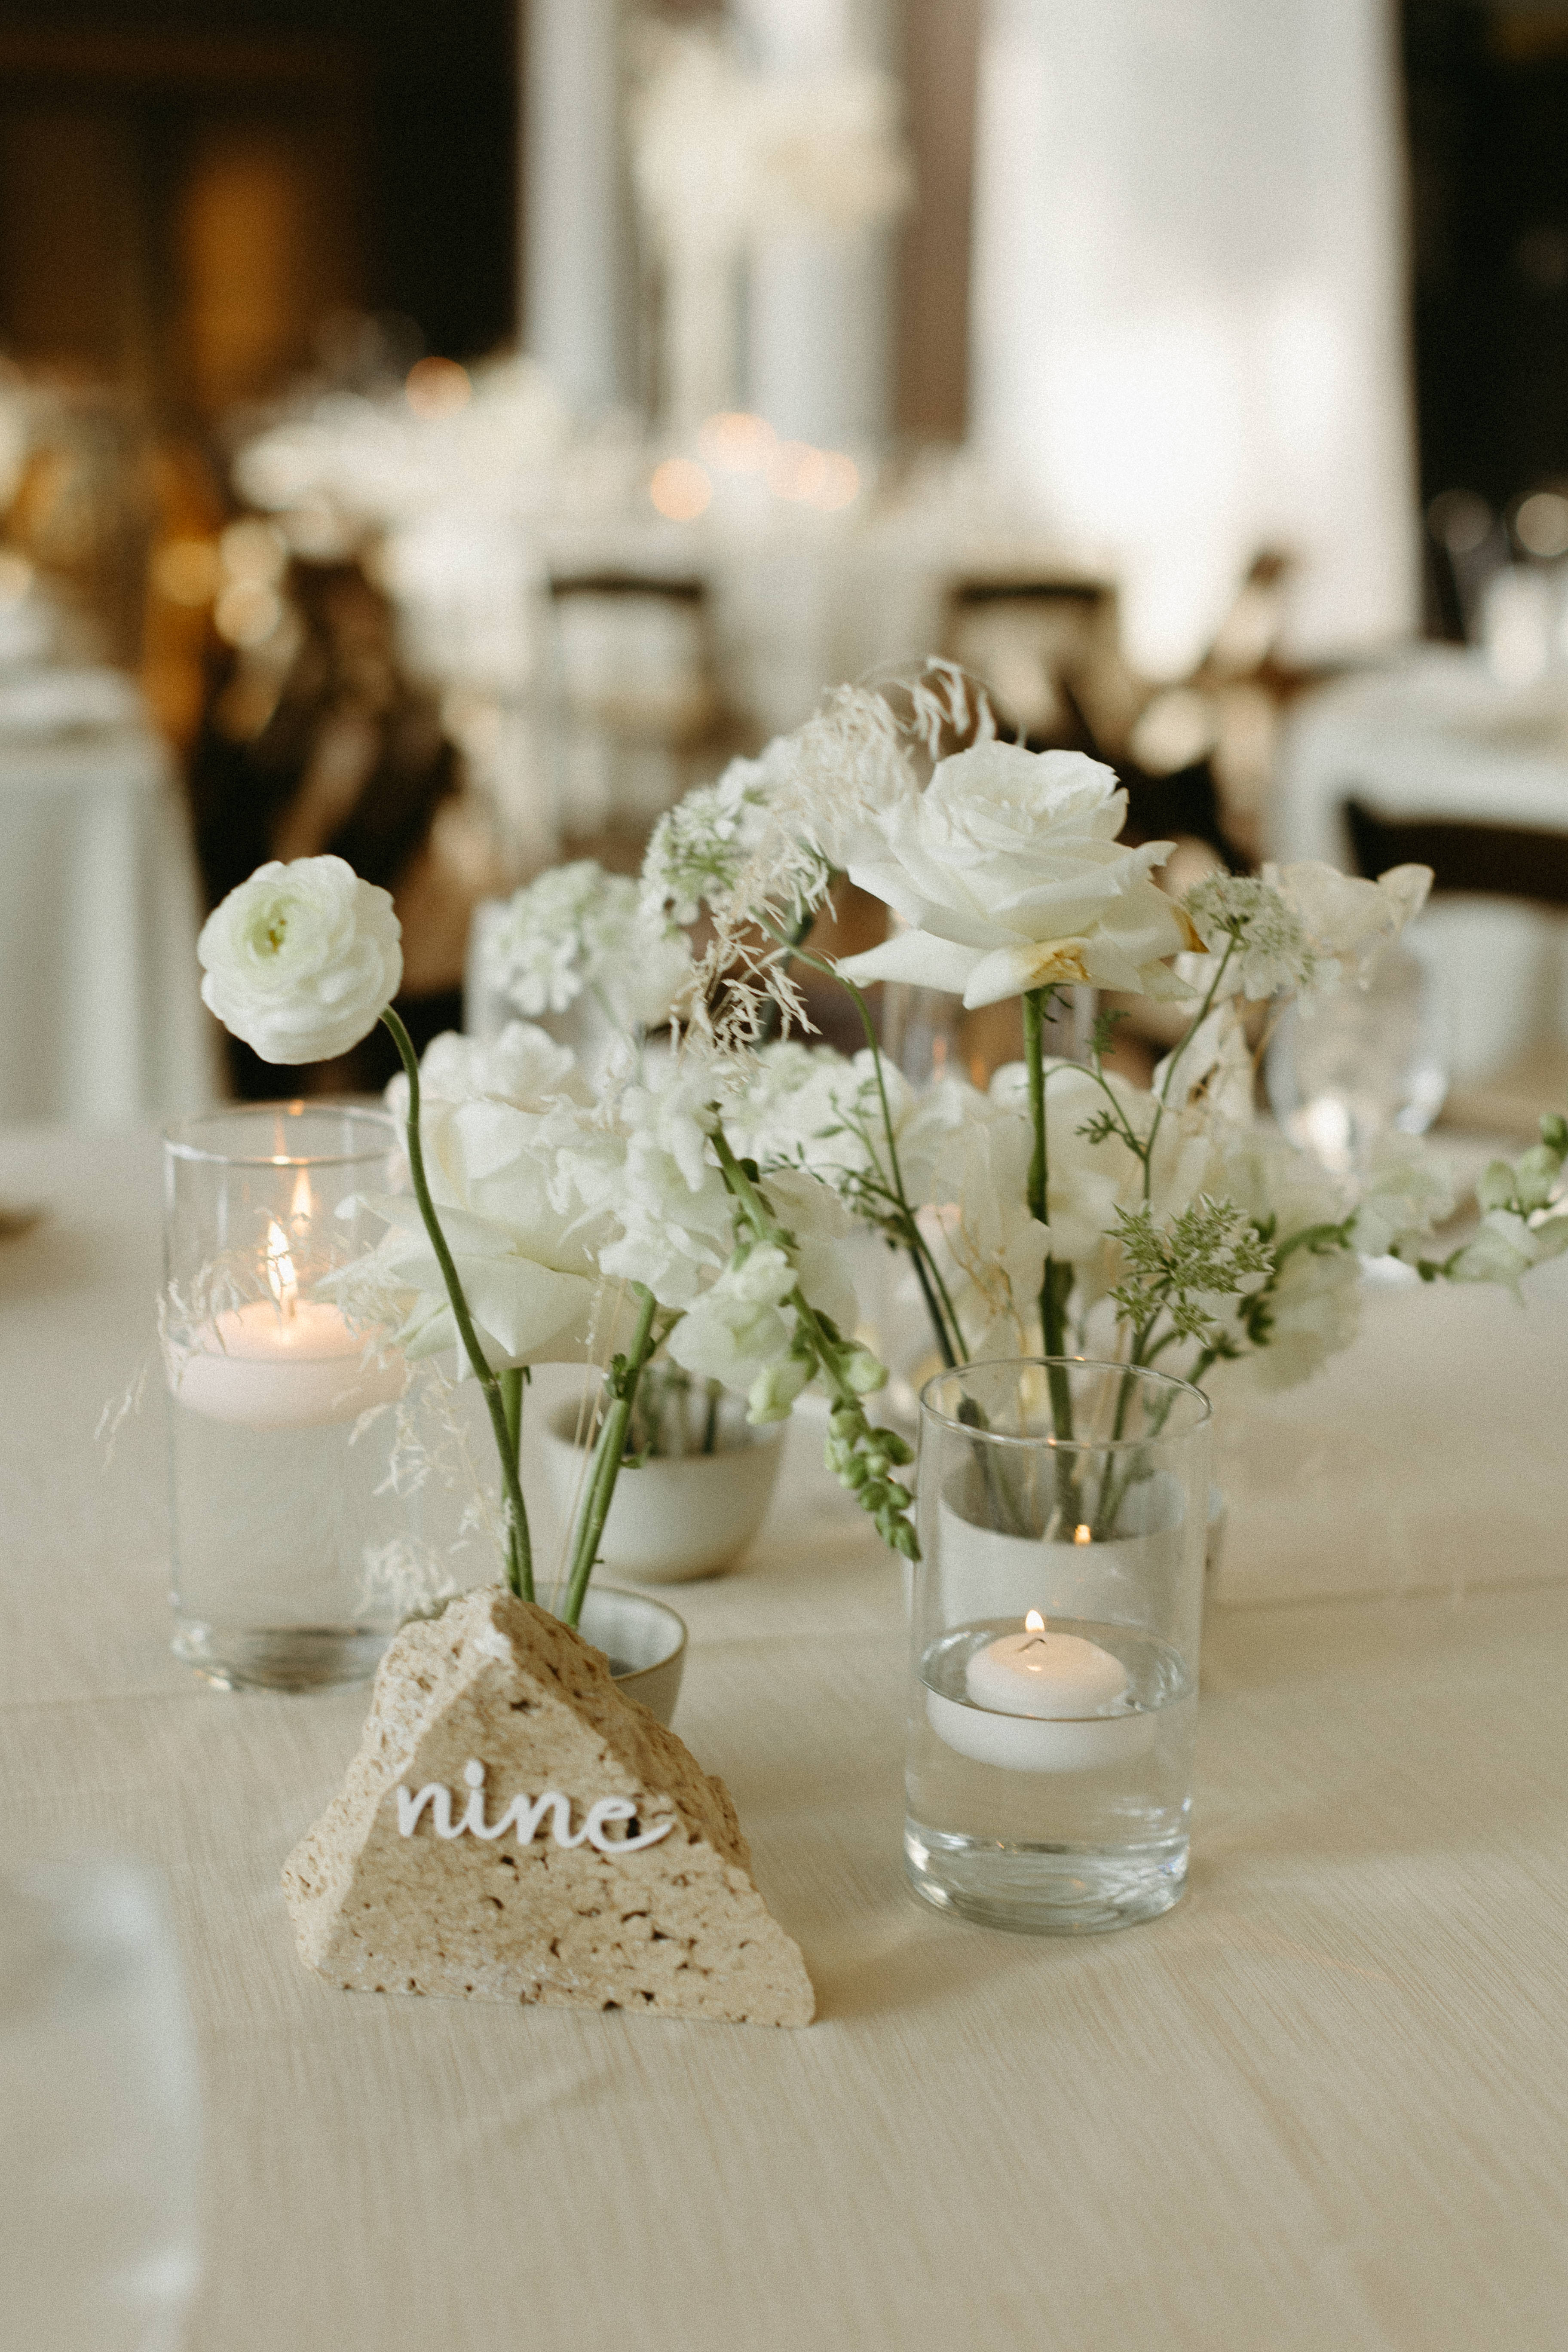 Stone table number atop formal tablescape with white florals and lined.